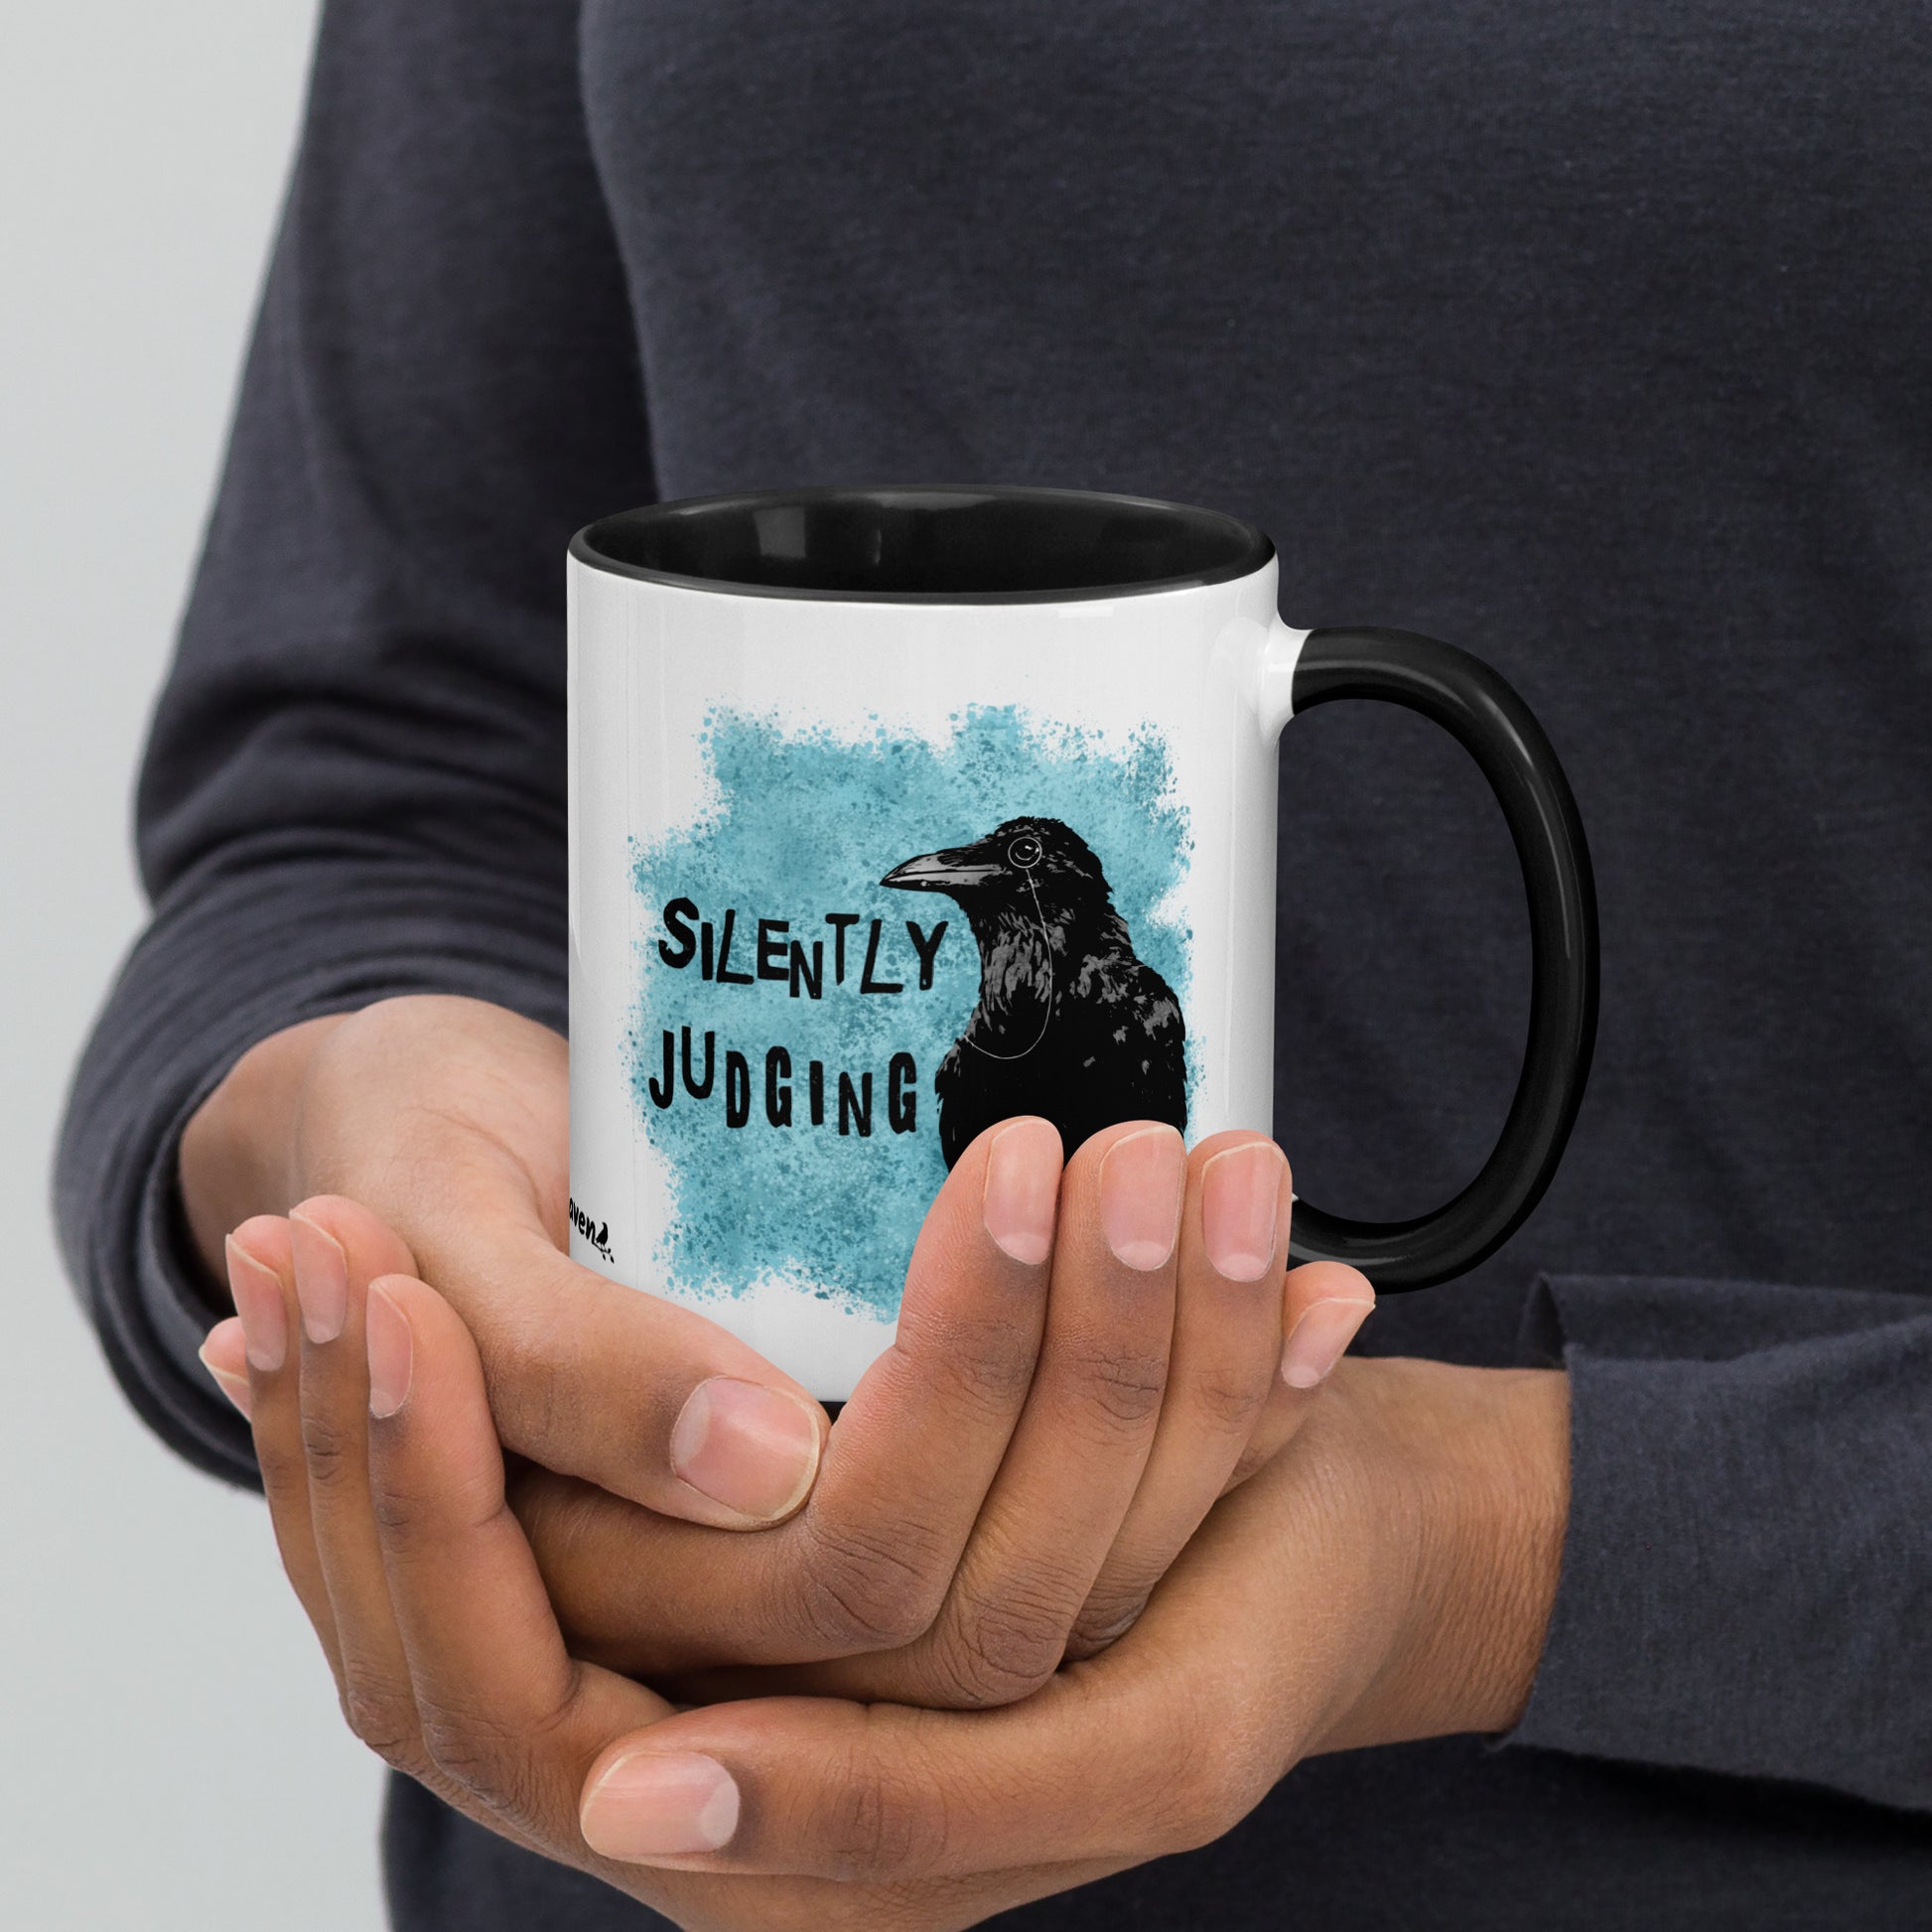 11 ounce ceramic mug with Silently Judging text next to a monacle-wearing crow on blue paint splatters. Double-sided design. Mug has black rim, handle, and inside. Shown in the hands of a model.